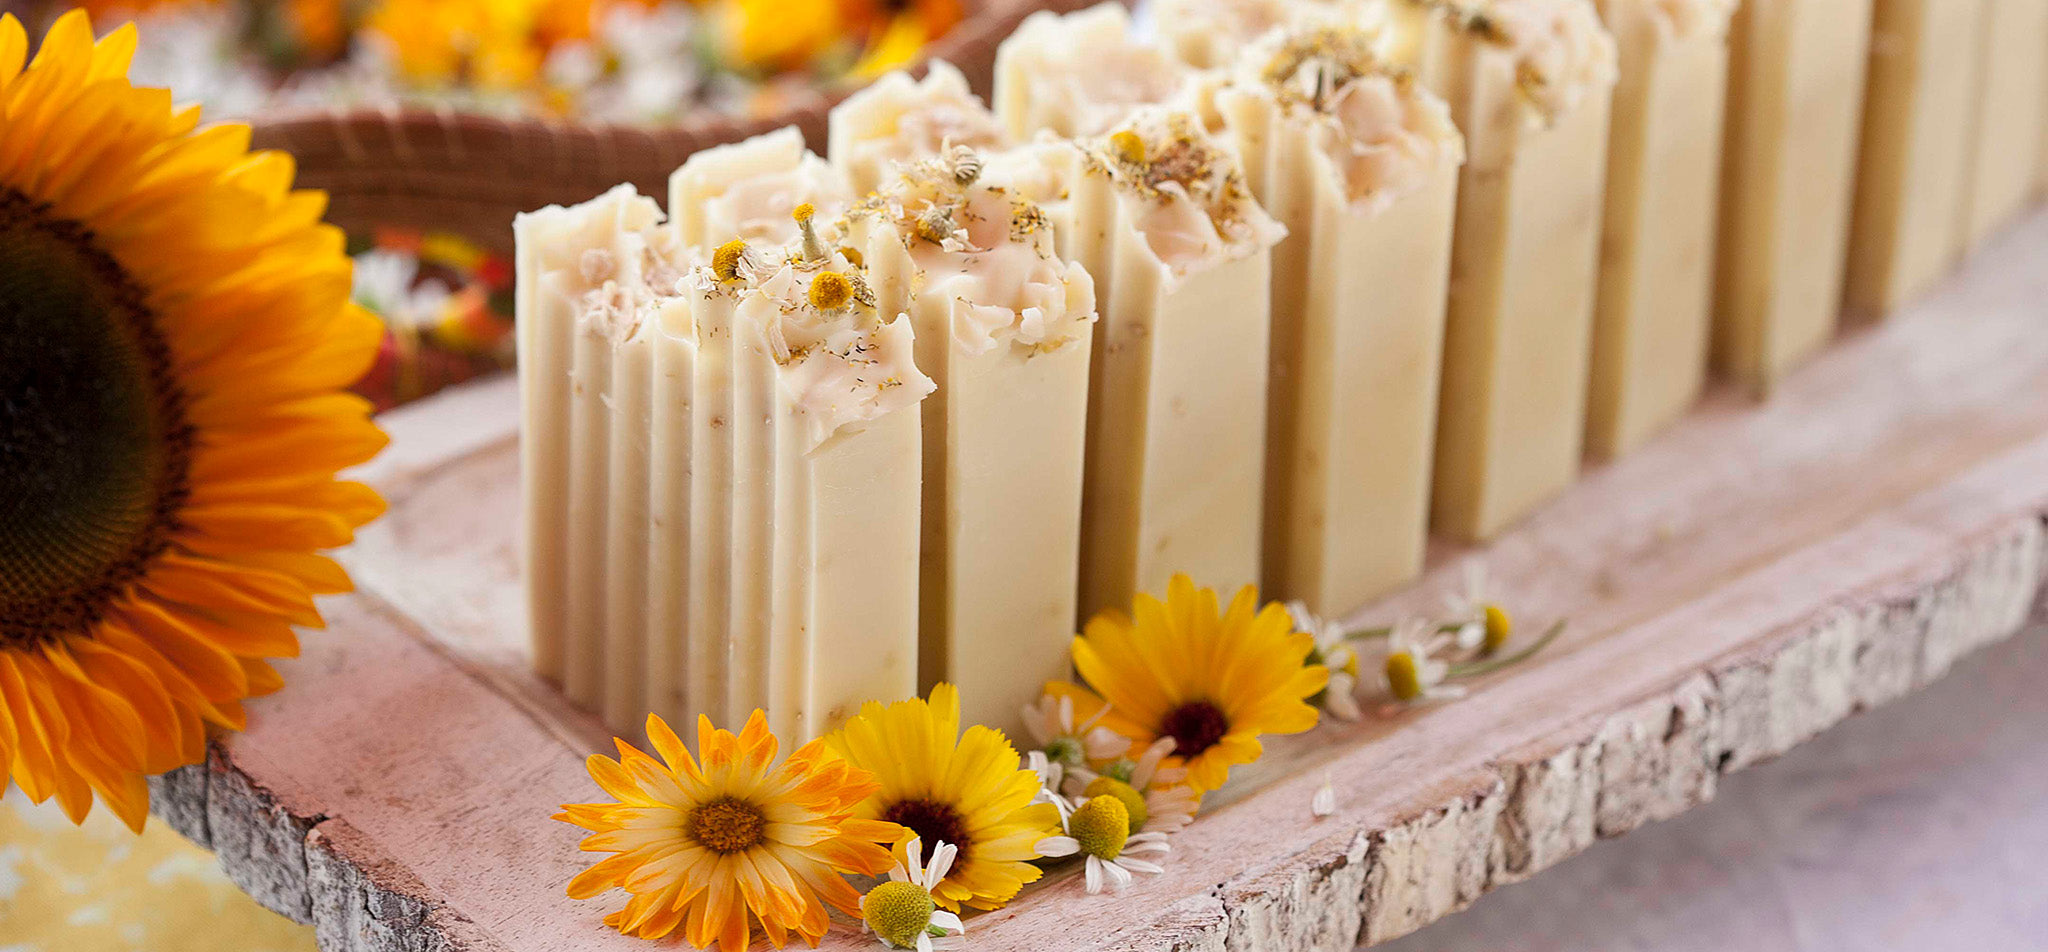 queen-of-cups-cold-pressed-soap-with-sunflowers-calendula.jpg